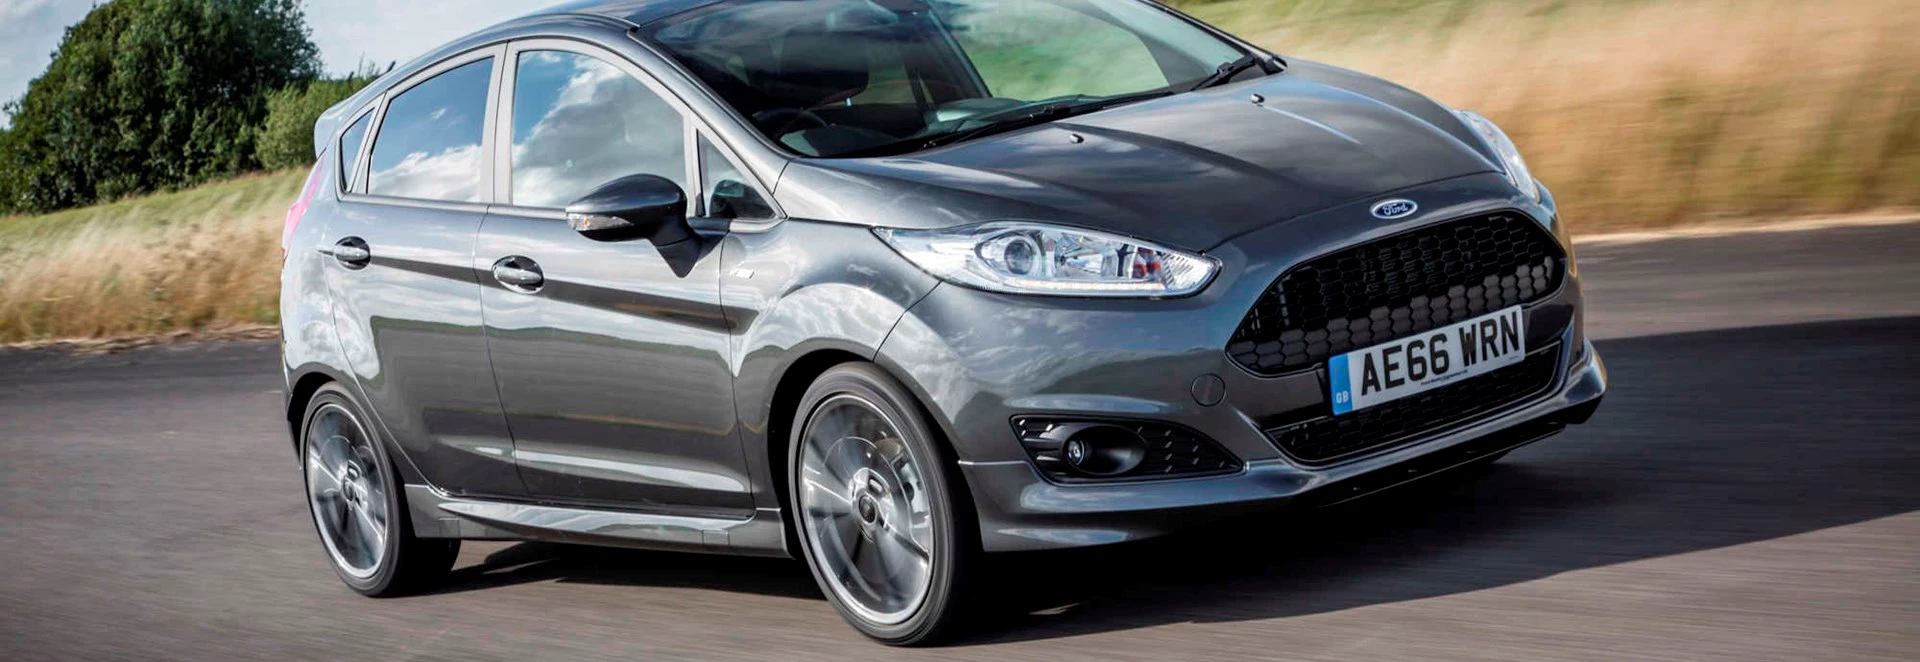 Ford Fiesta ST-Line 1.0-litre EcoBoost 140 review 